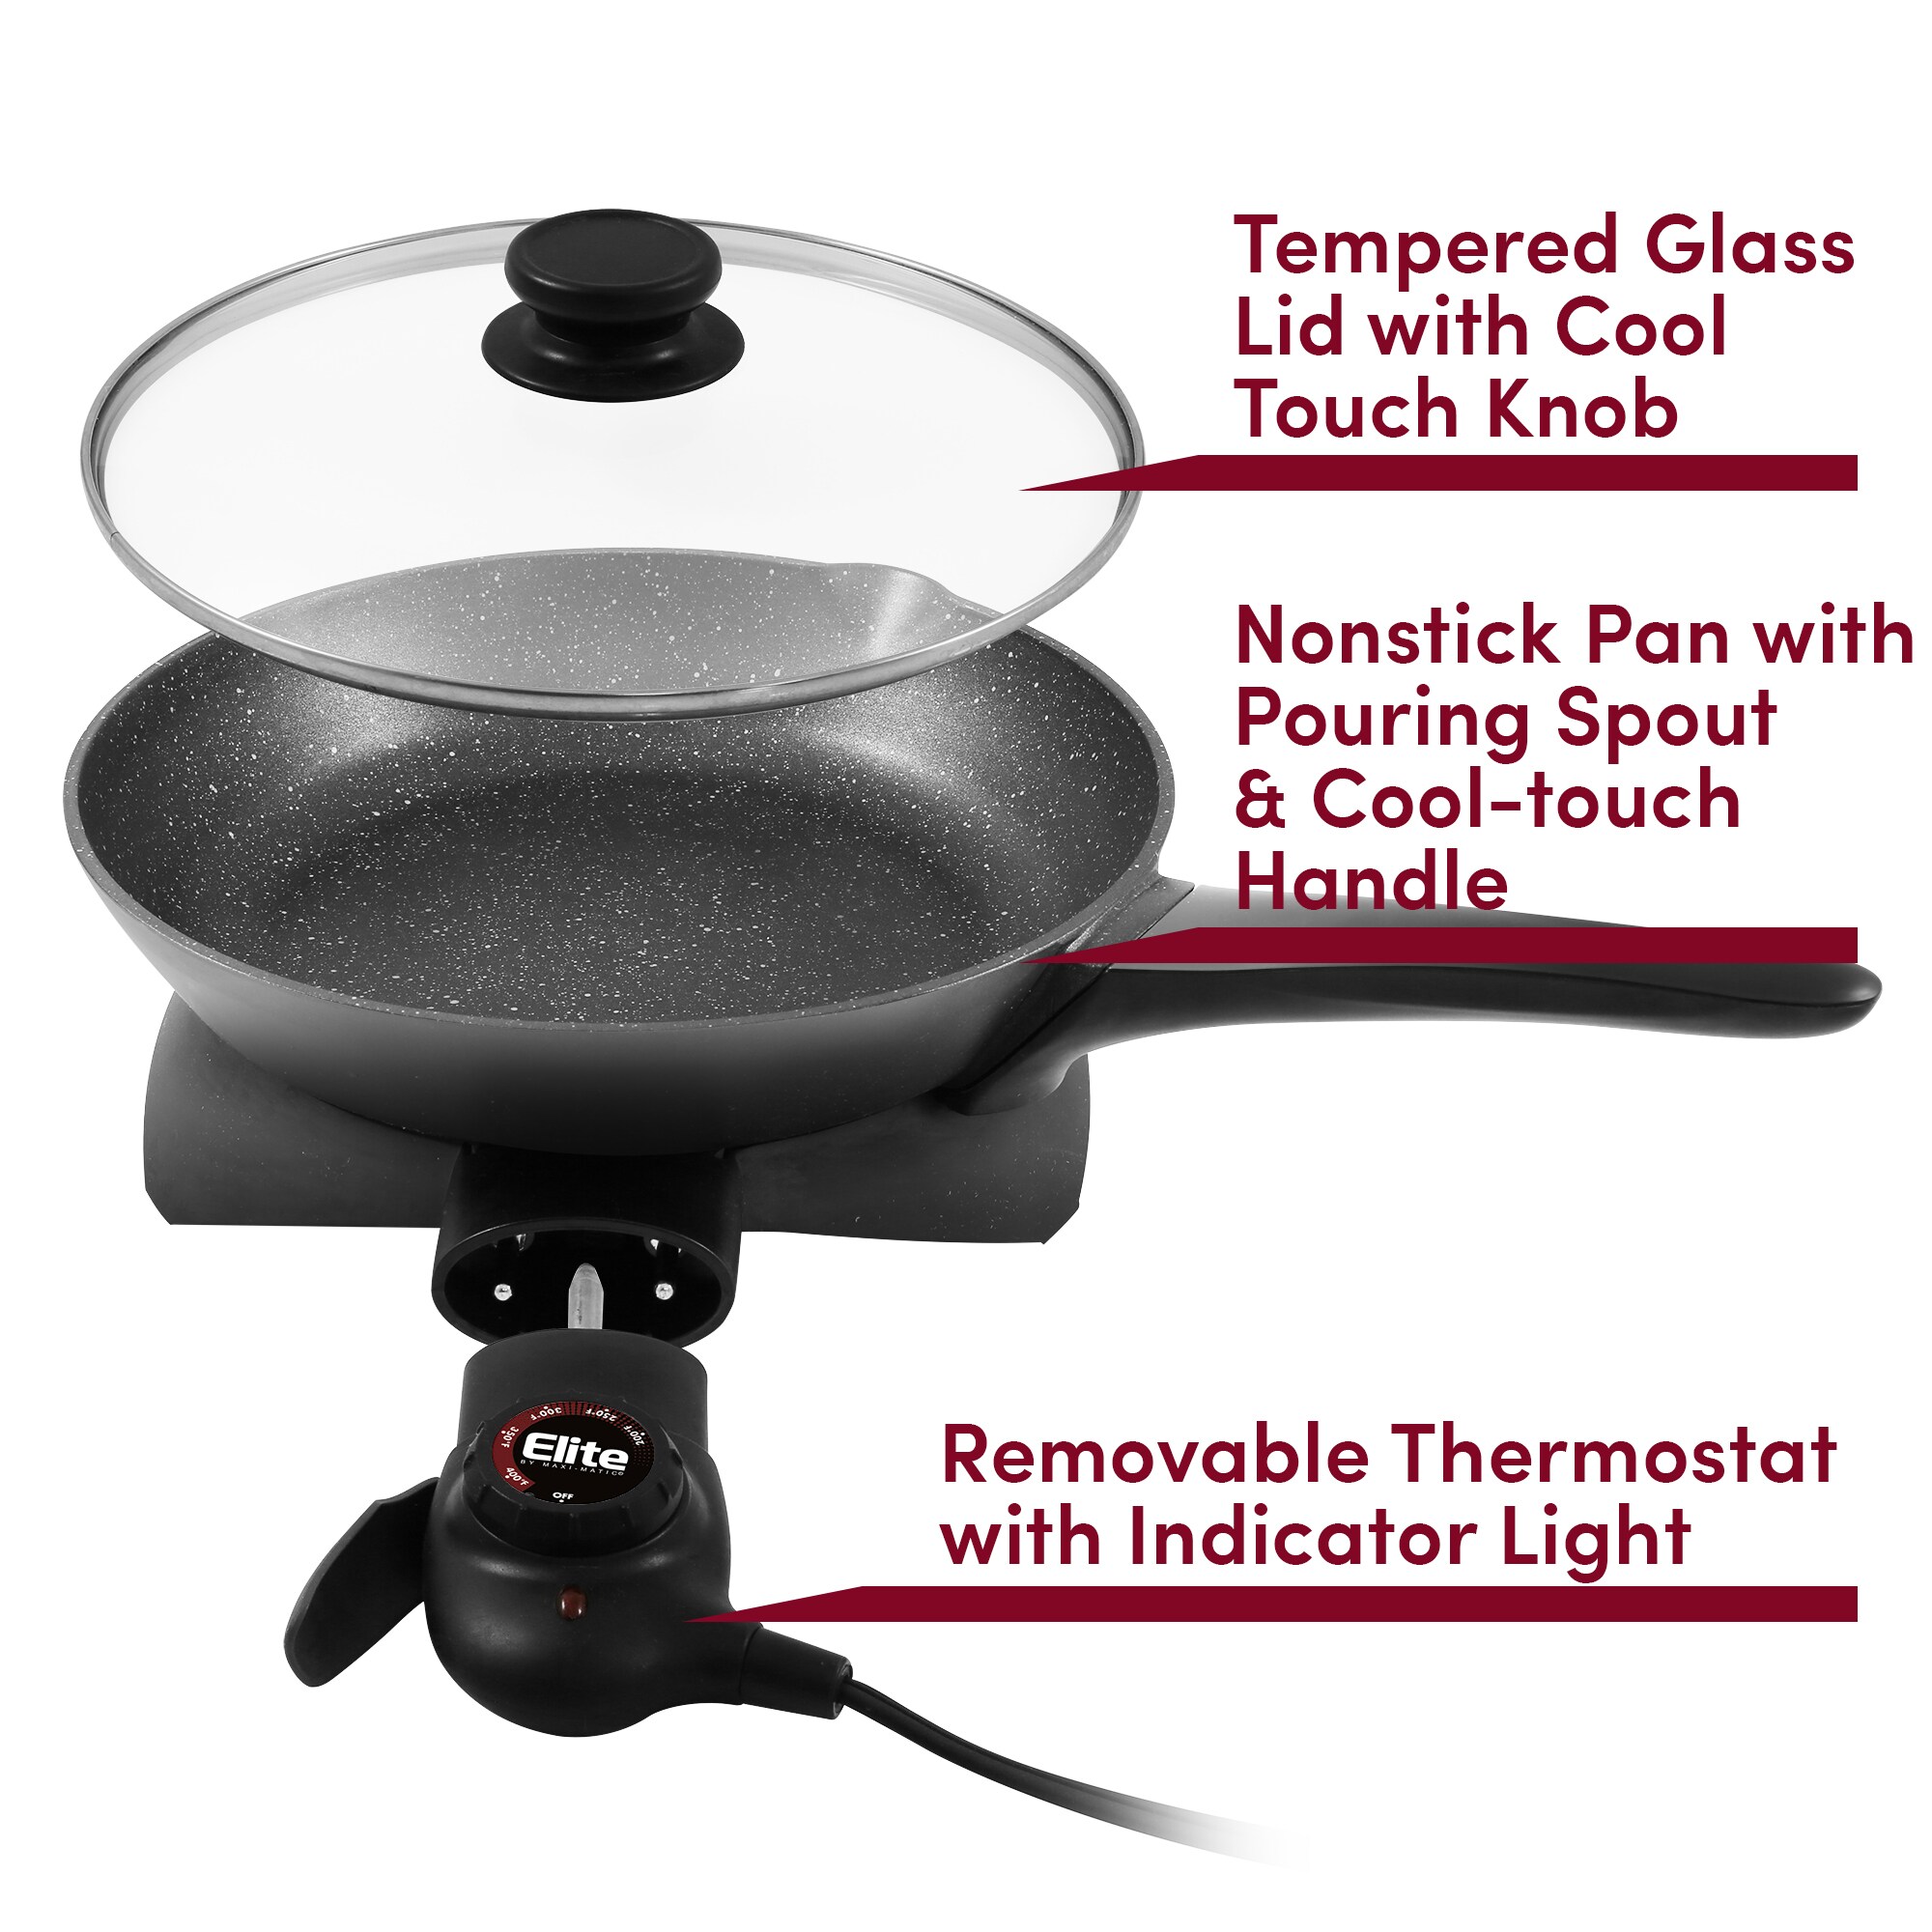  Kenmore Non-Stick Electric Skillet with Tempered Glass